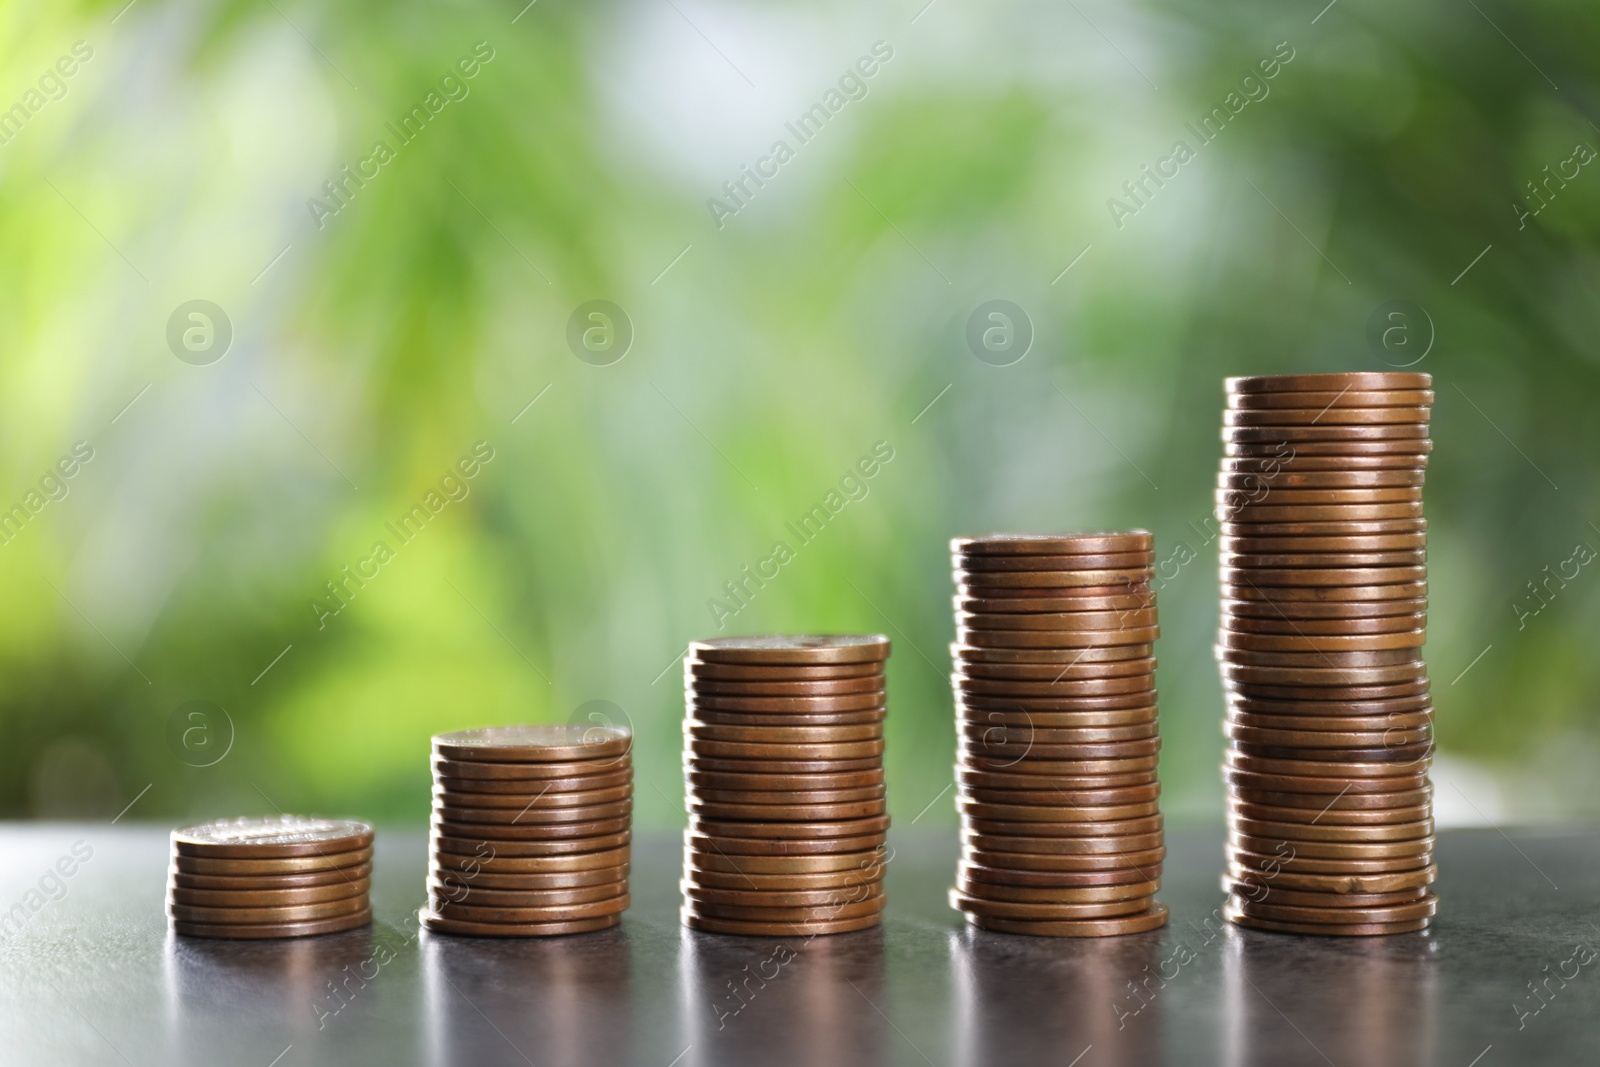 Photo of Stacked coins on grey table against blurred green background